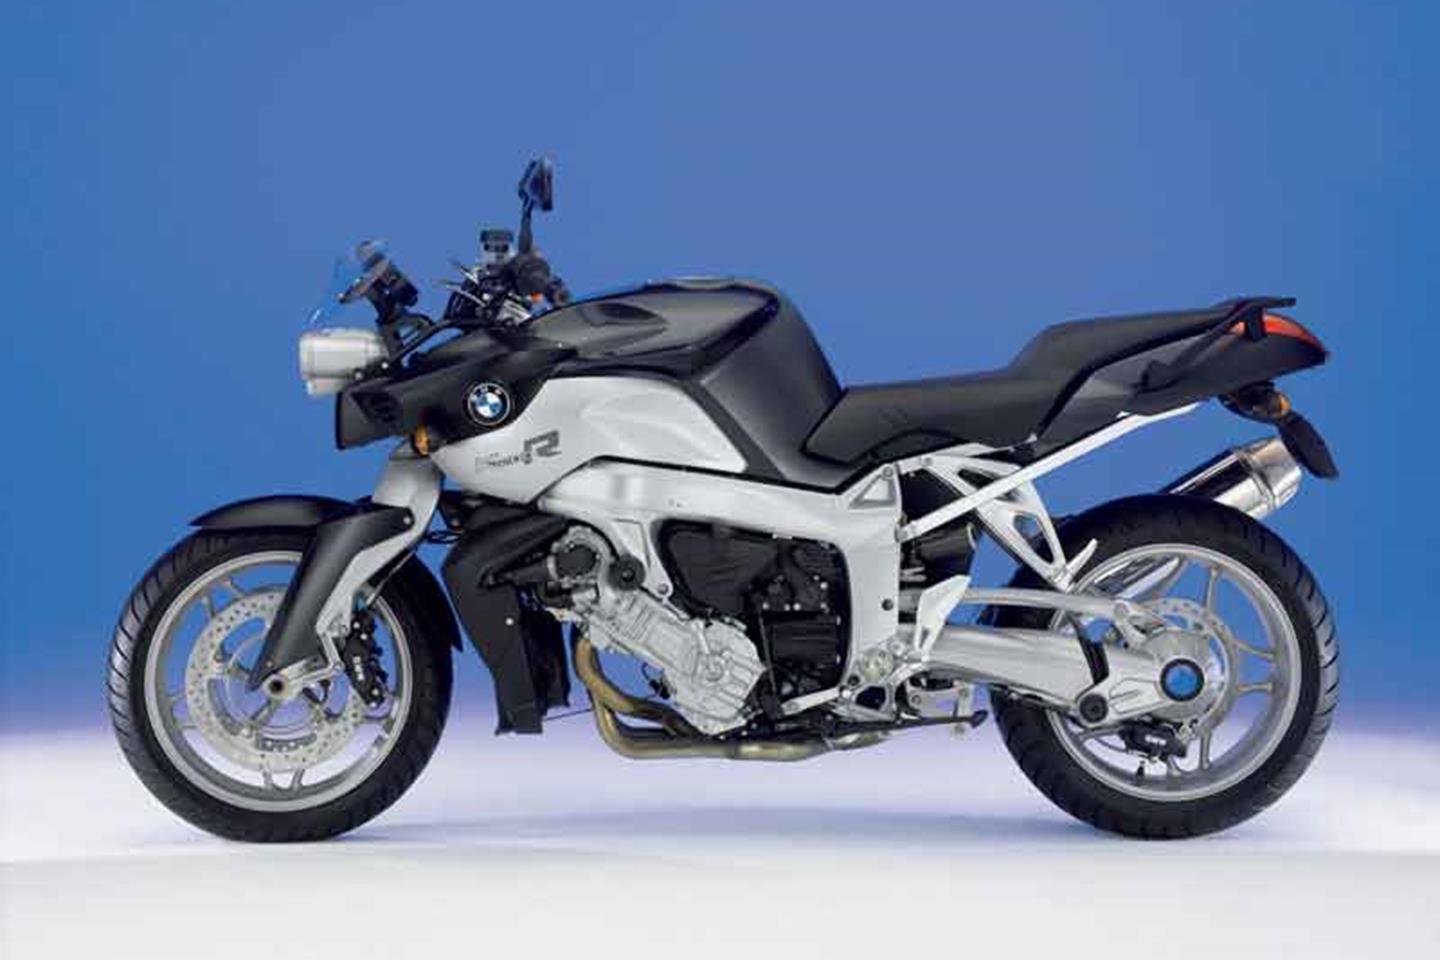 BMW K1200R (2005-2008) Review | Speed, Specs & Prices